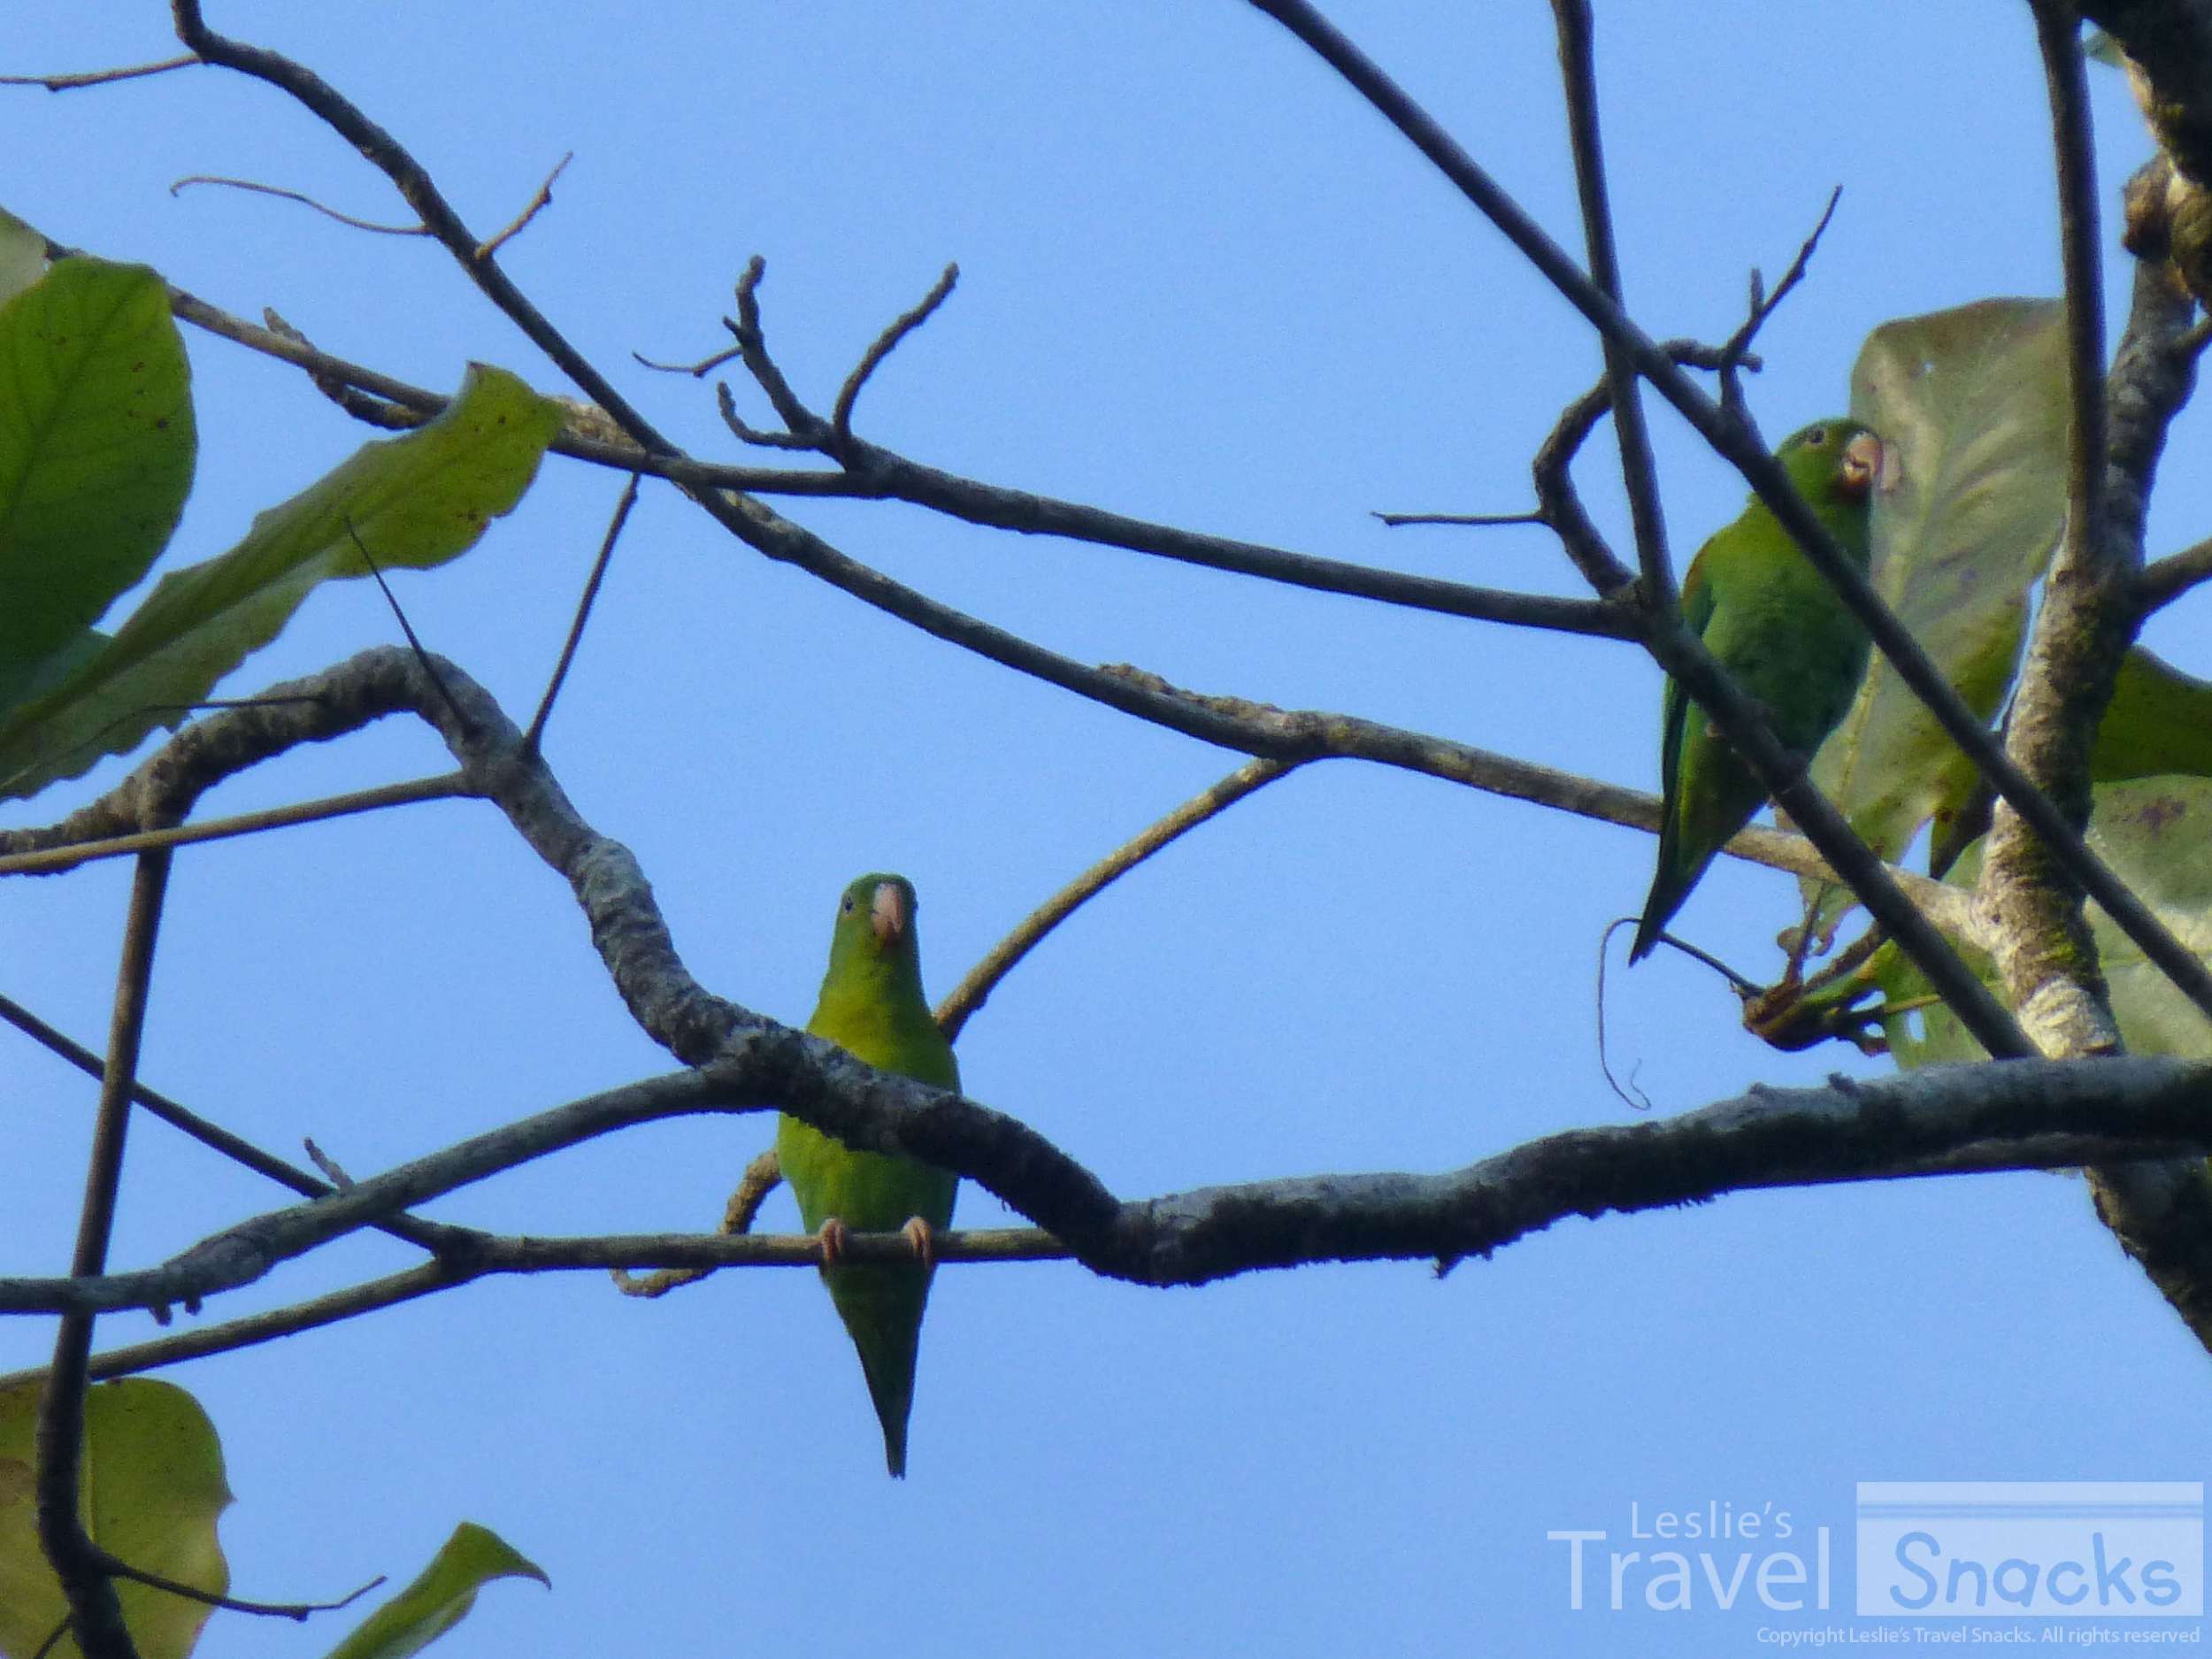 Some pretty little Orange Chinned Parakeets in the neighbor's tree.